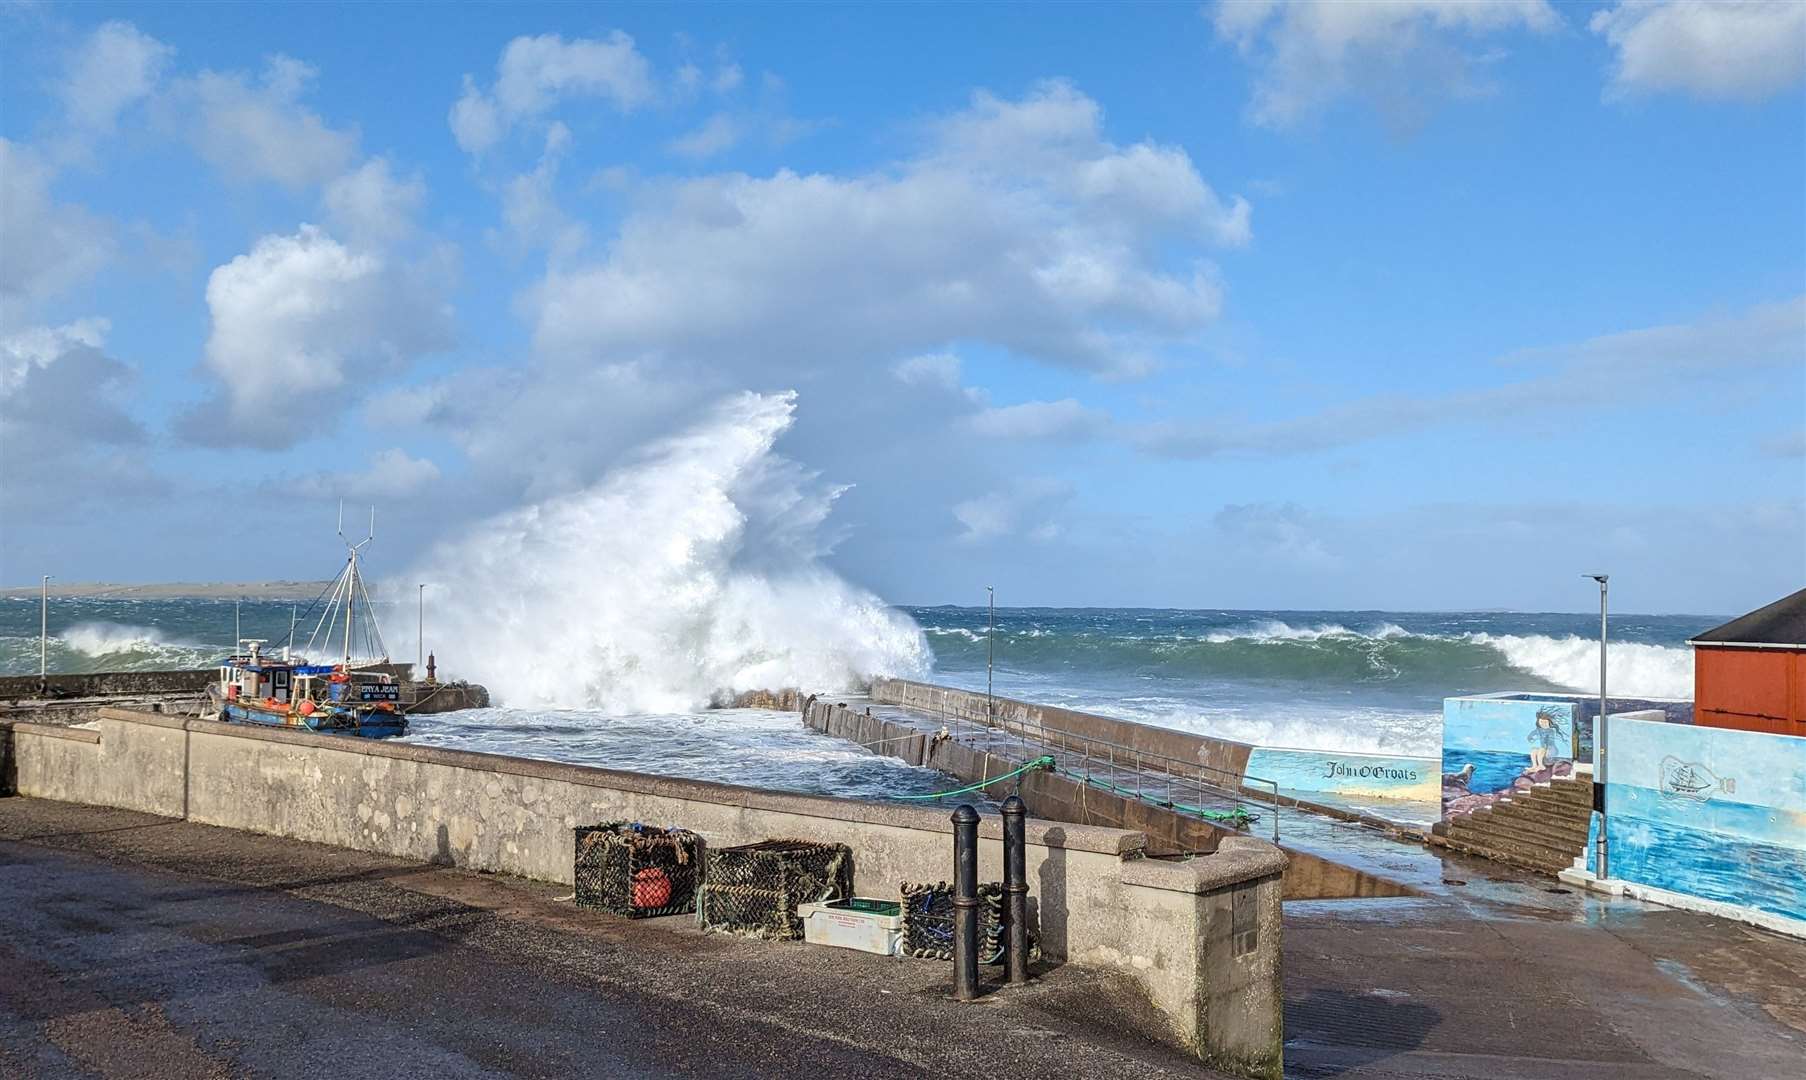 John O'Groats during Storm Babet, photographed by Suzie Hay of Castletown.